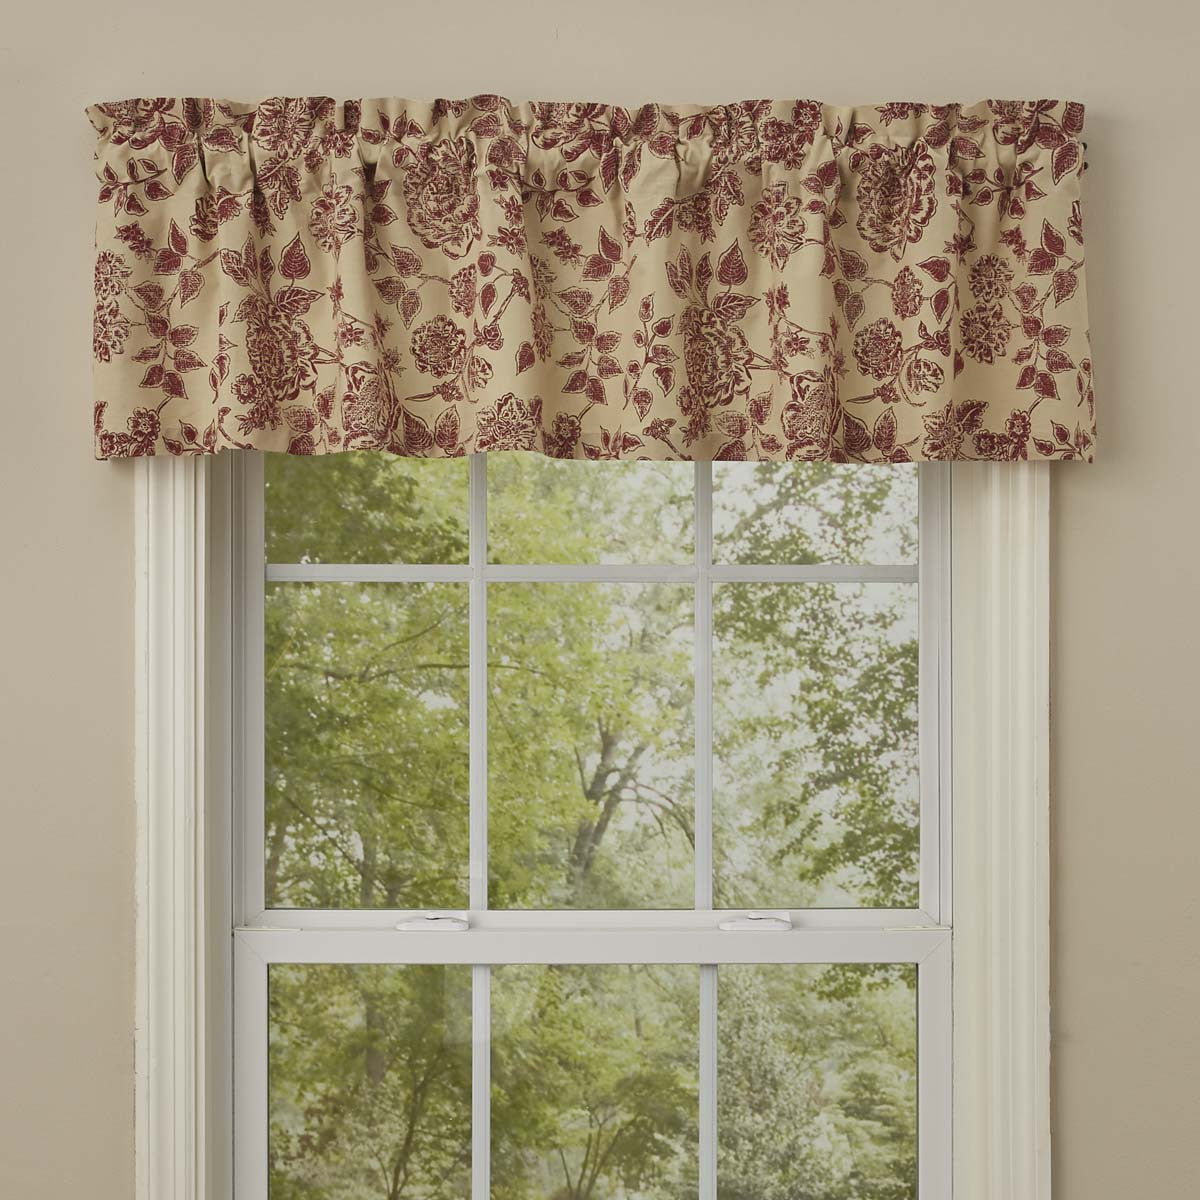 Rustic Floral Valance Curtains